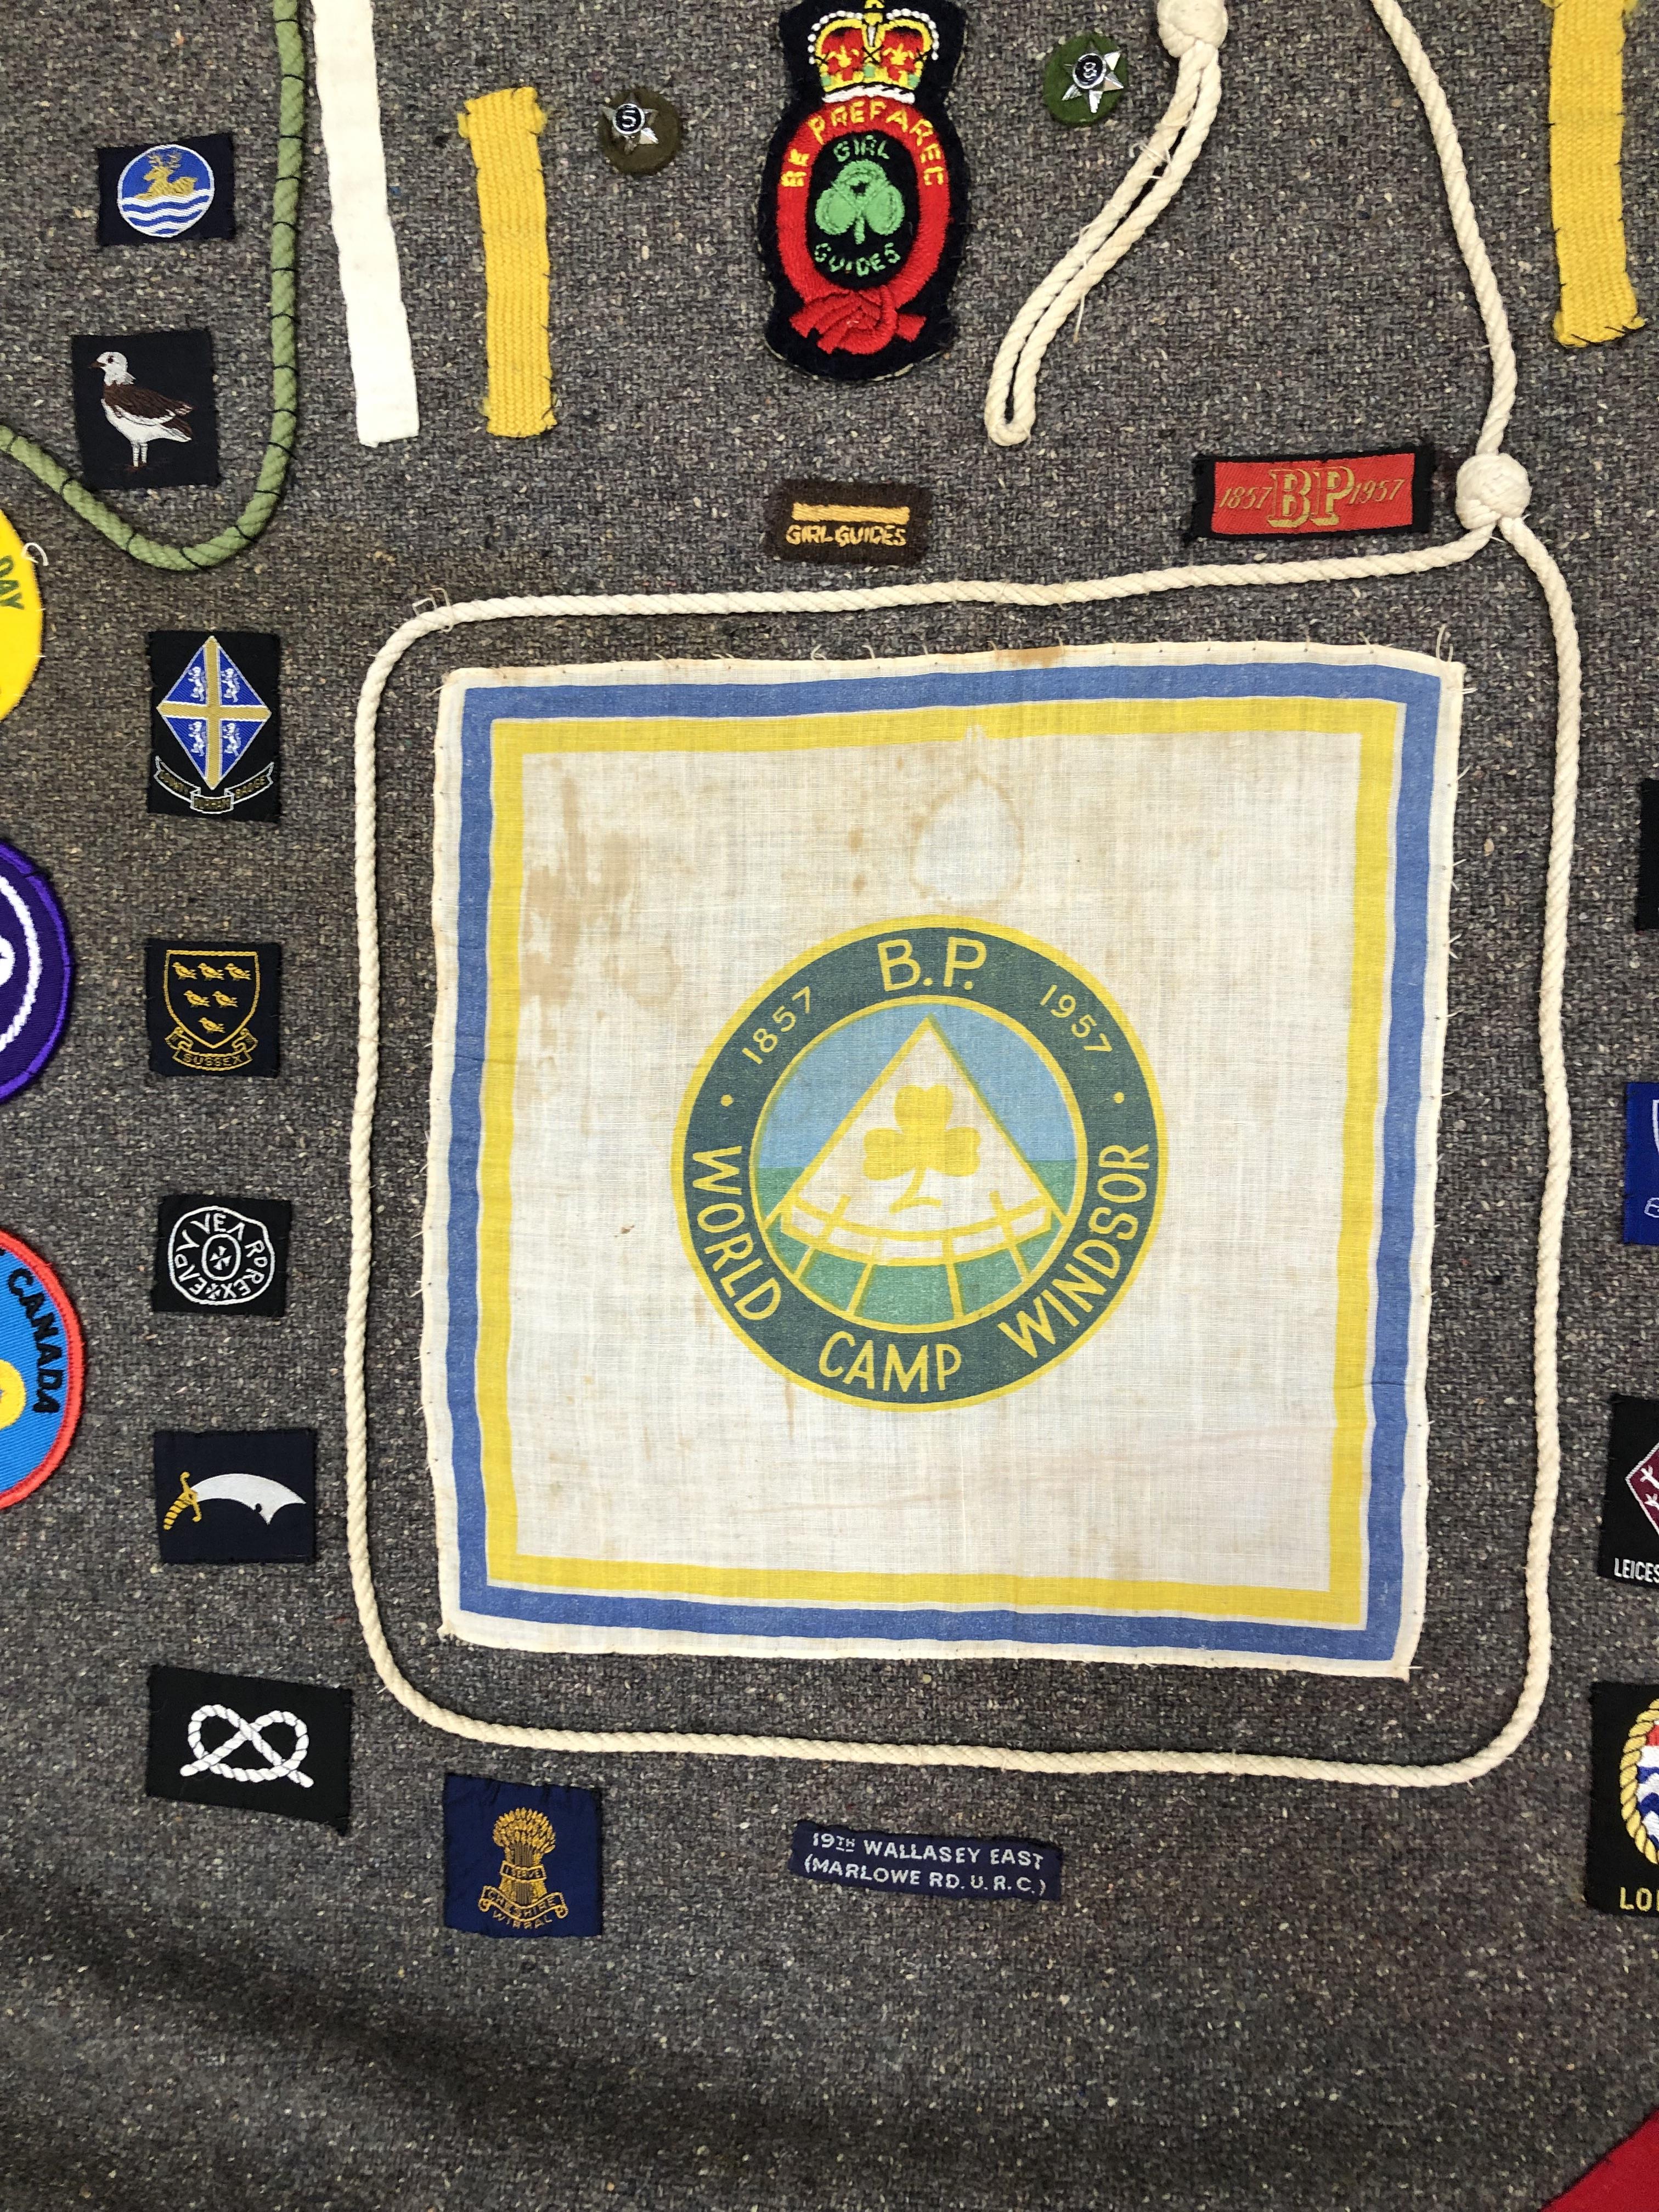 A GIRL GUIDE BLANKET WITH VINTAGE BADGES AND MEMORABILIA - Image 6 of 6